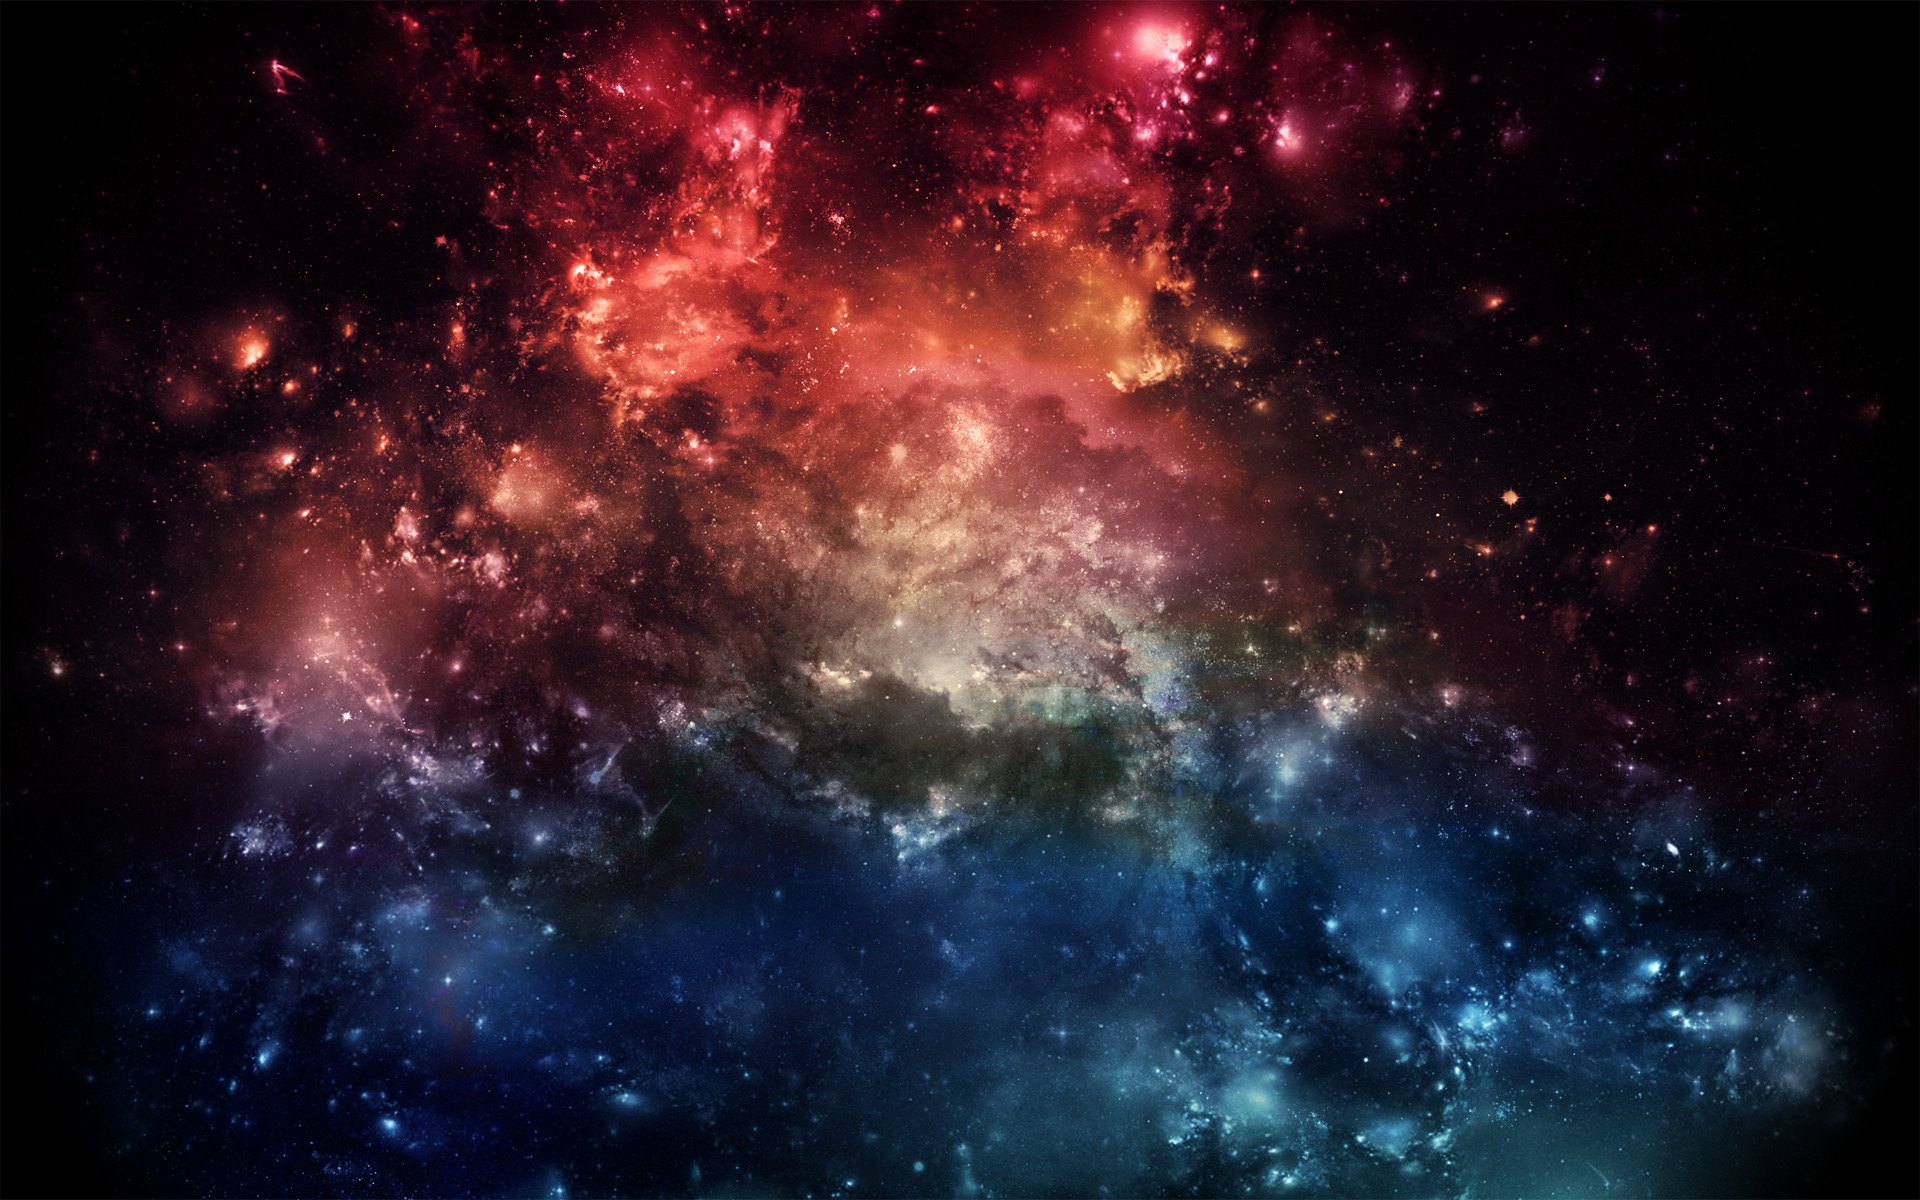 Fantasy Space Background